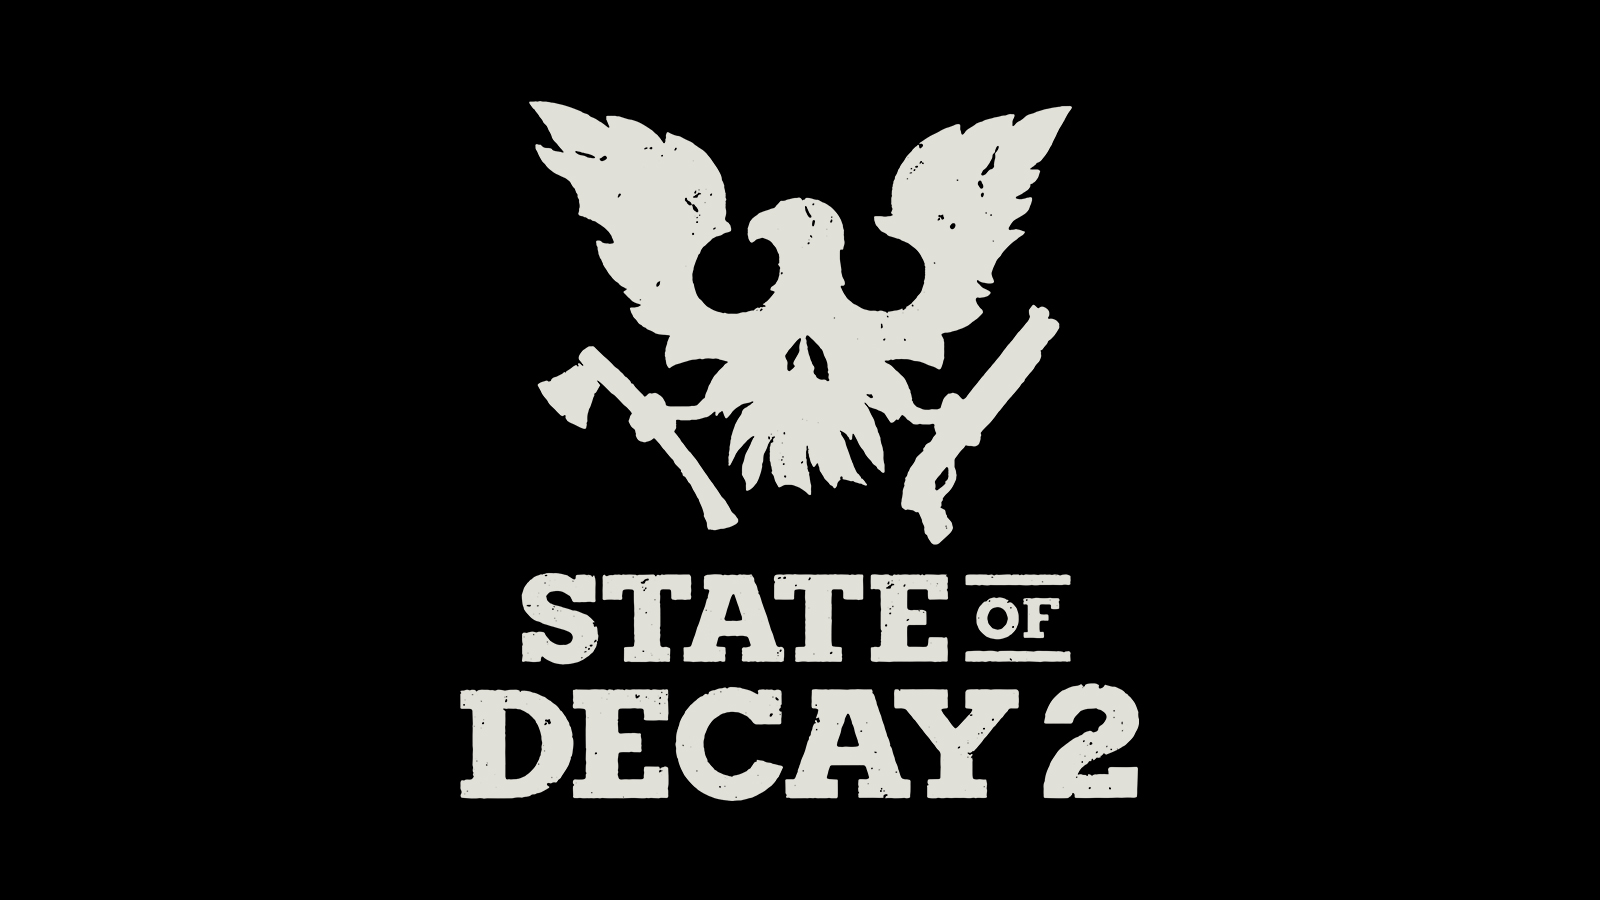 E3 2017: State of Decay 2 shown off at Xbox Press Conference with 4K gameplay trailer